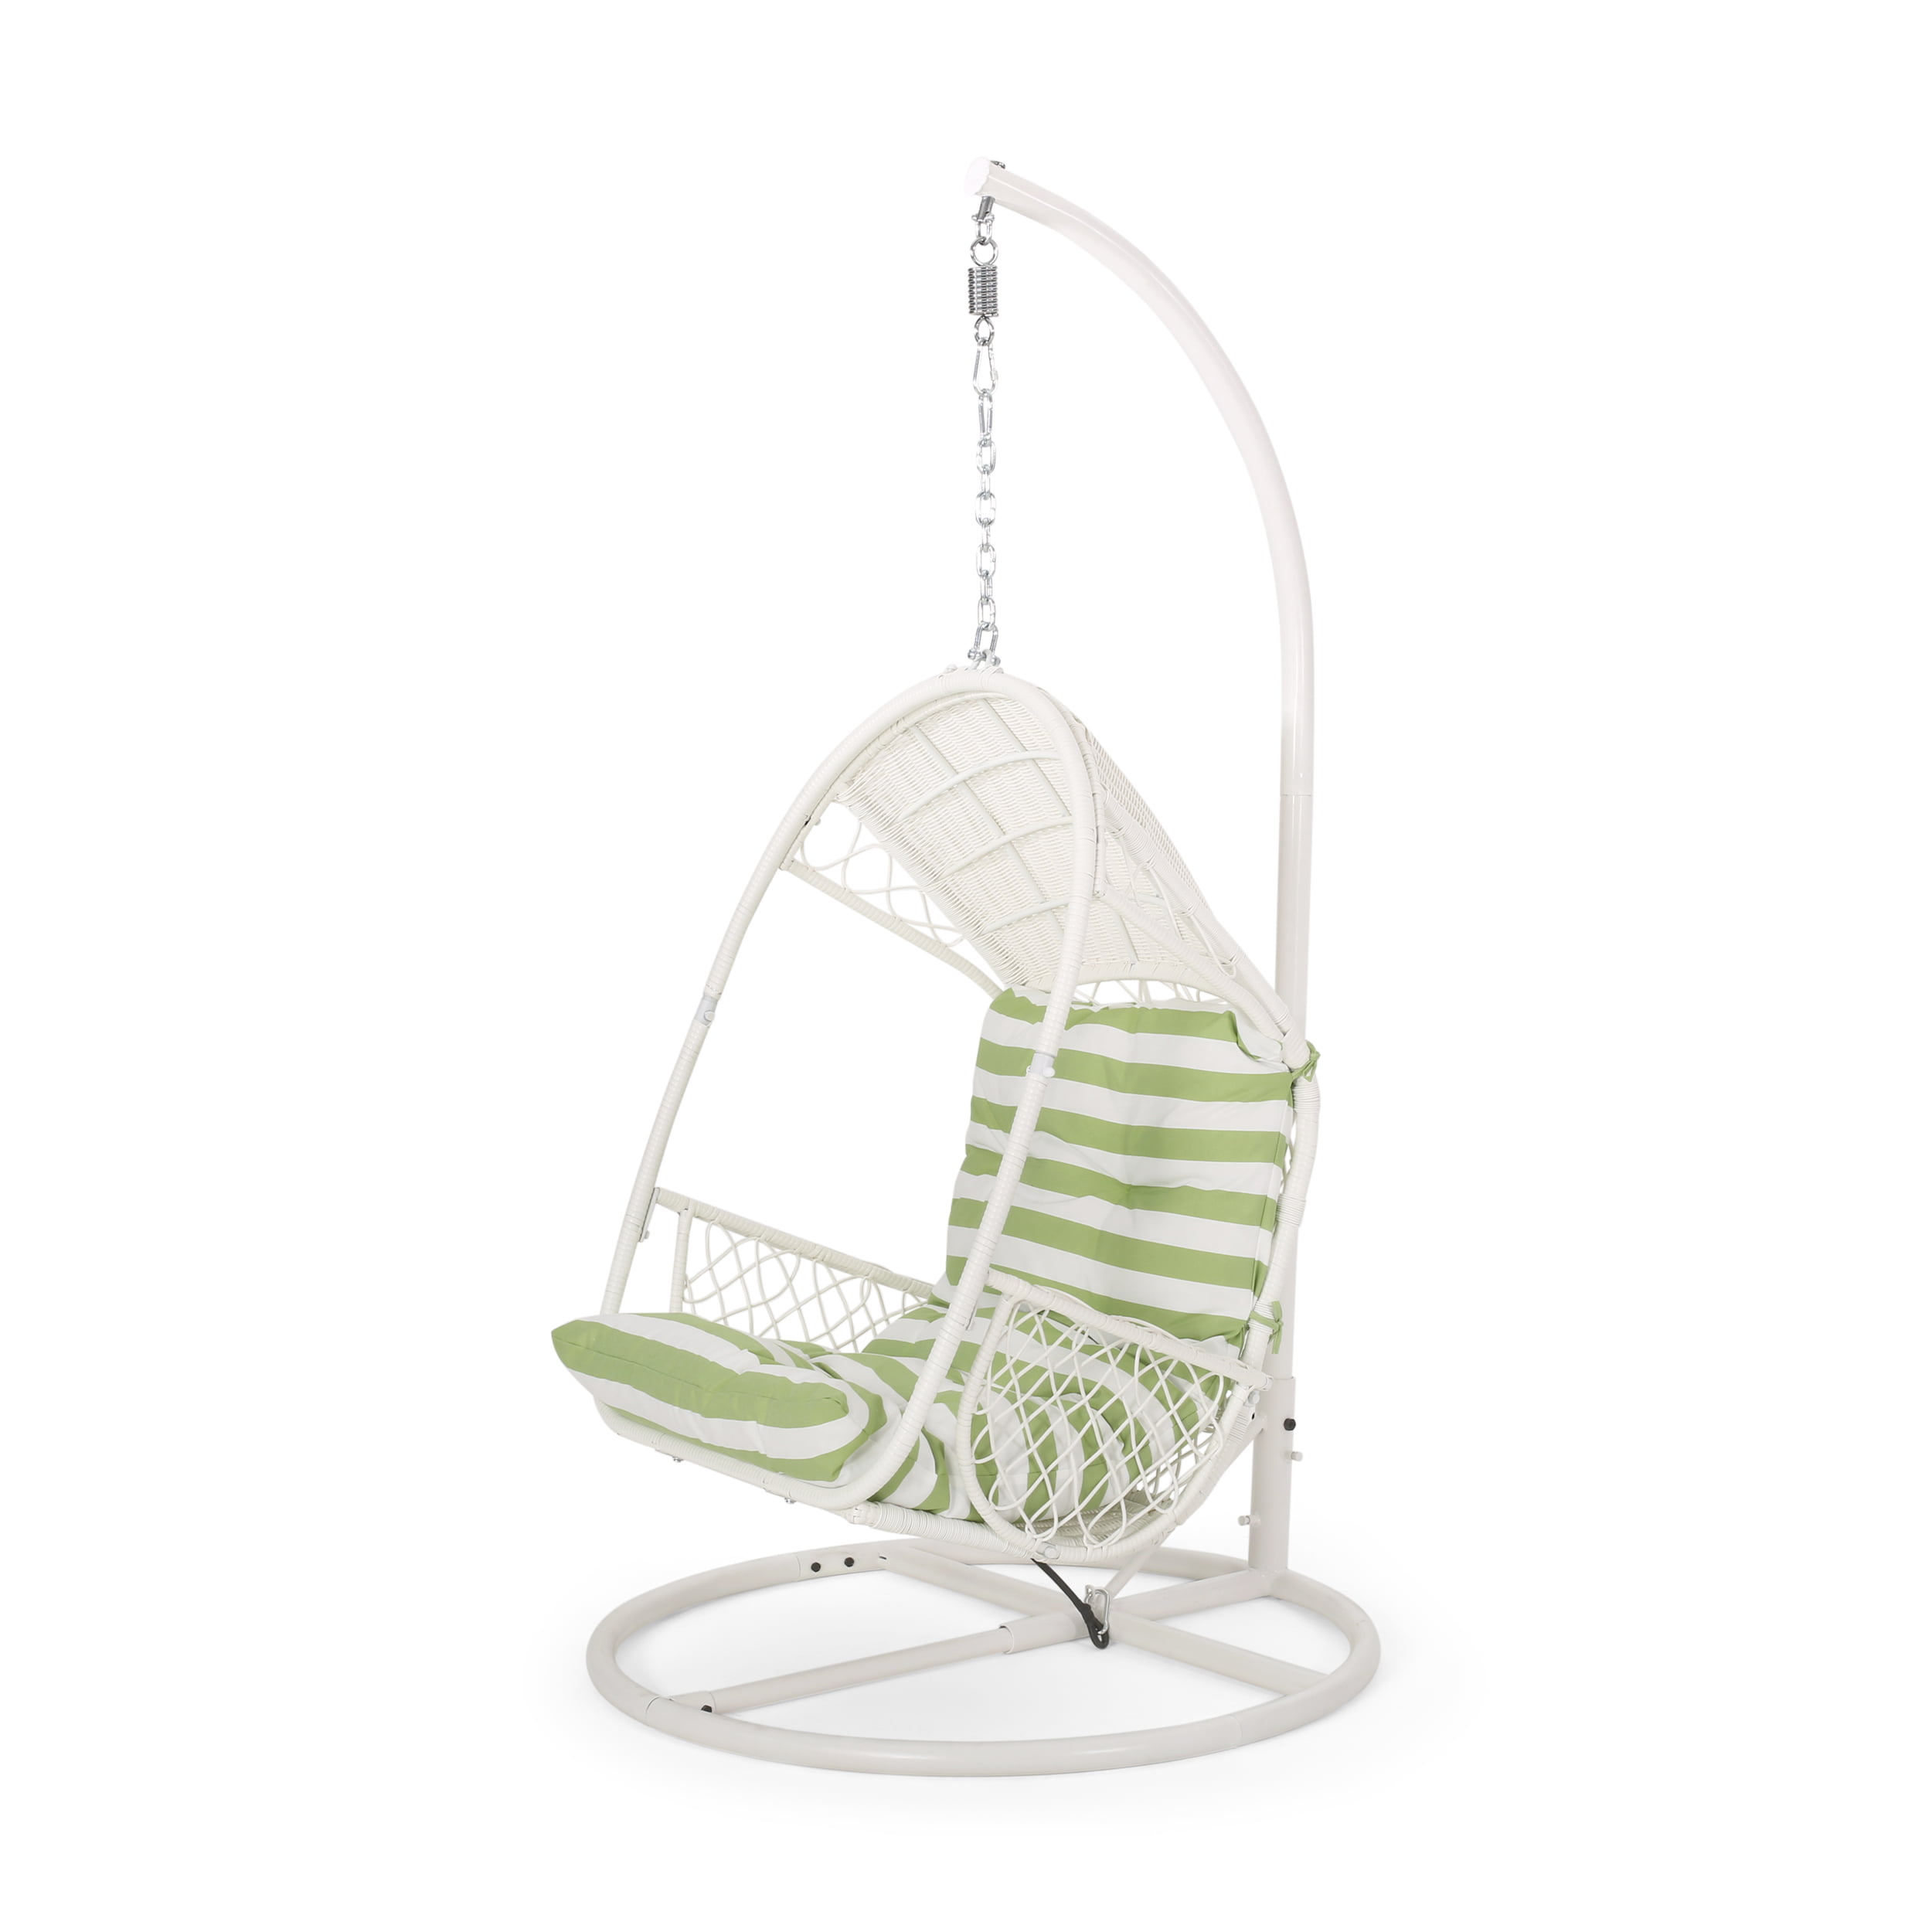 Maurice Wicker Hanging Chair with Stand, White, Green